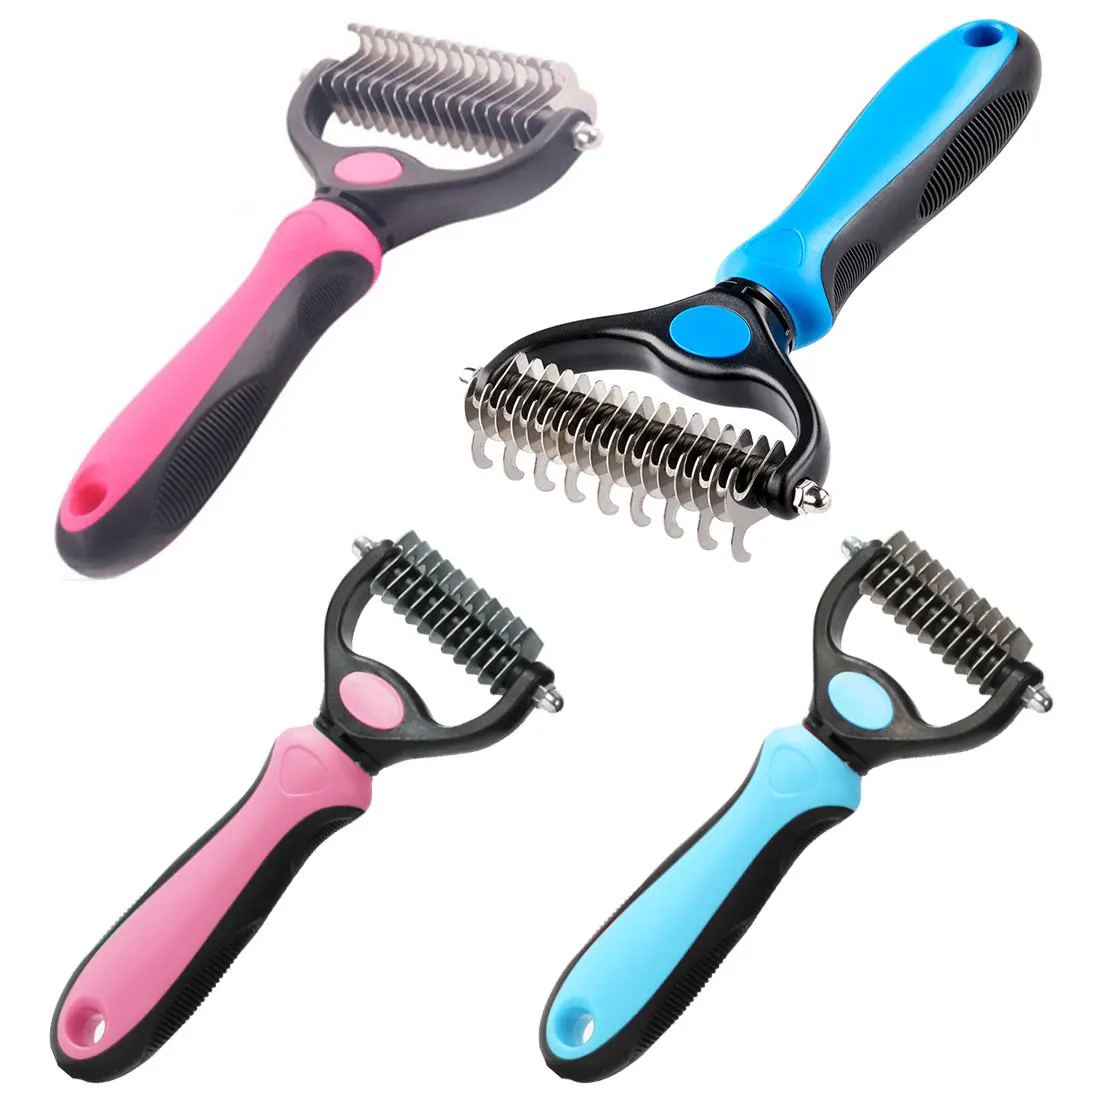 Color : No box, Size : One size JDBLD Electric Pet Dog Grooming Comb Cat Hair Trimmer Knot Out Remove Mats Tangles Tool Supplies Grooming Cat Brush For Dogs Removes 